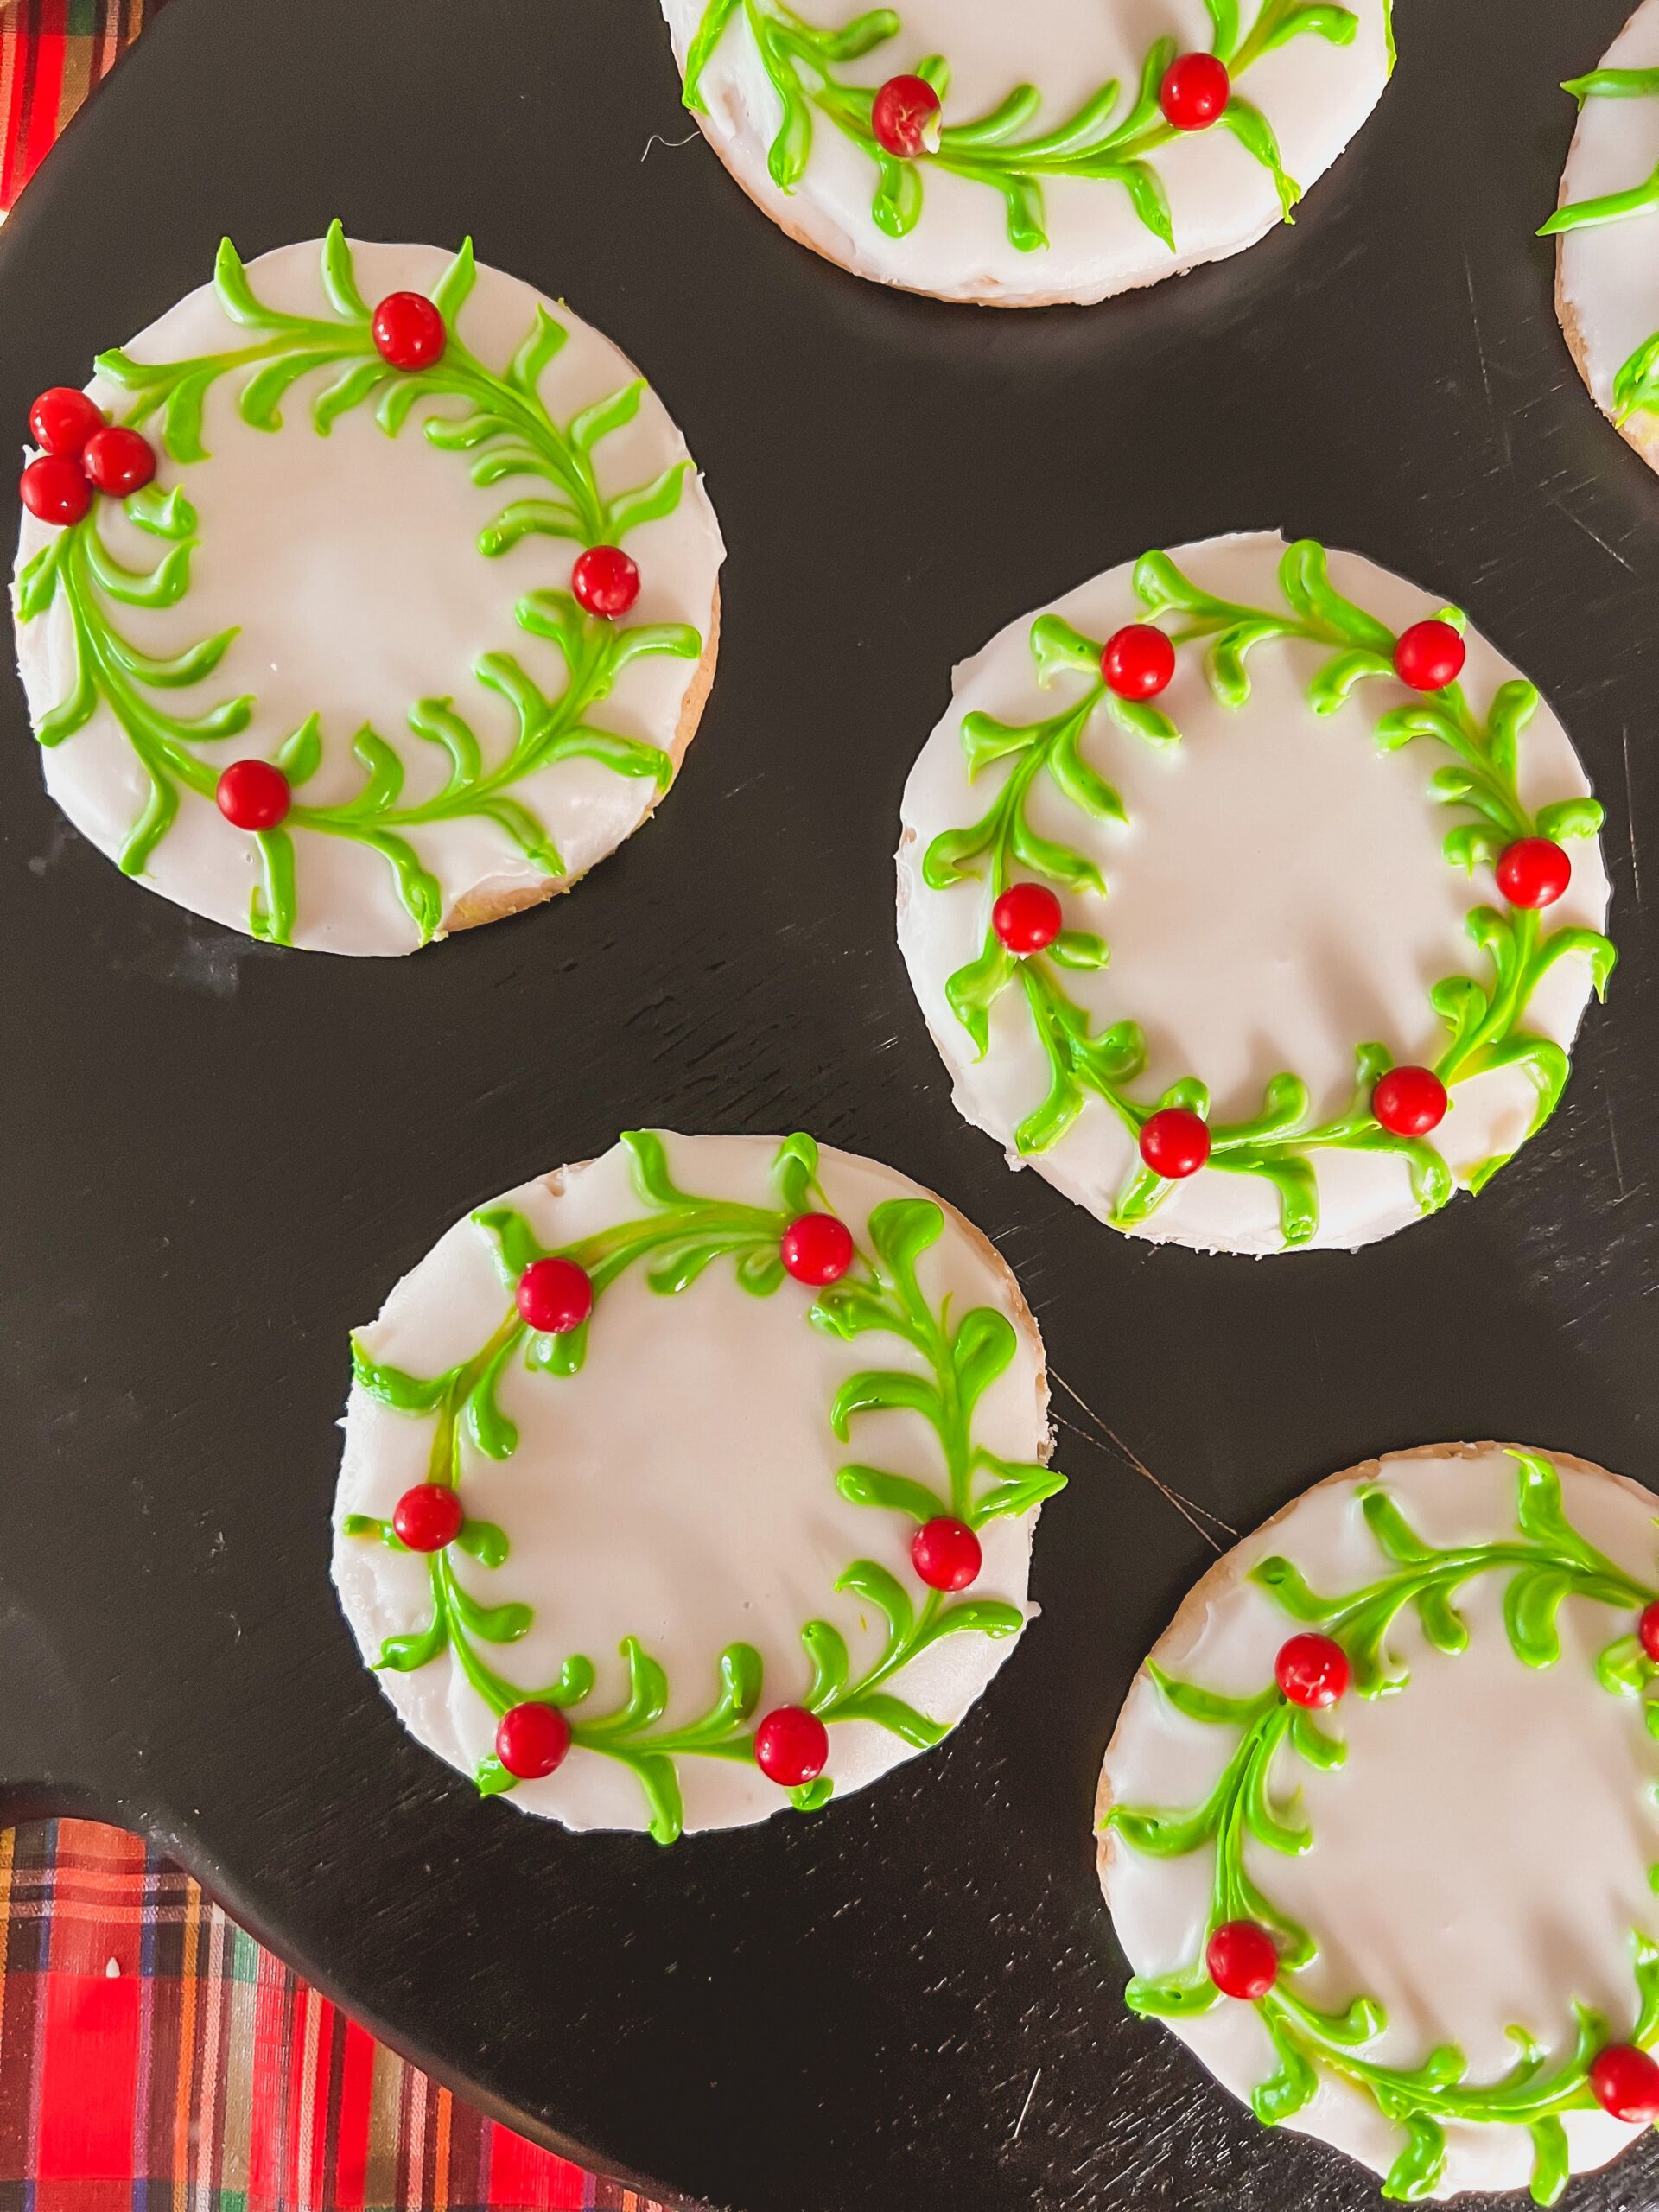 This Cookie Decorating Hack Makes Homemade Treats Look Professional